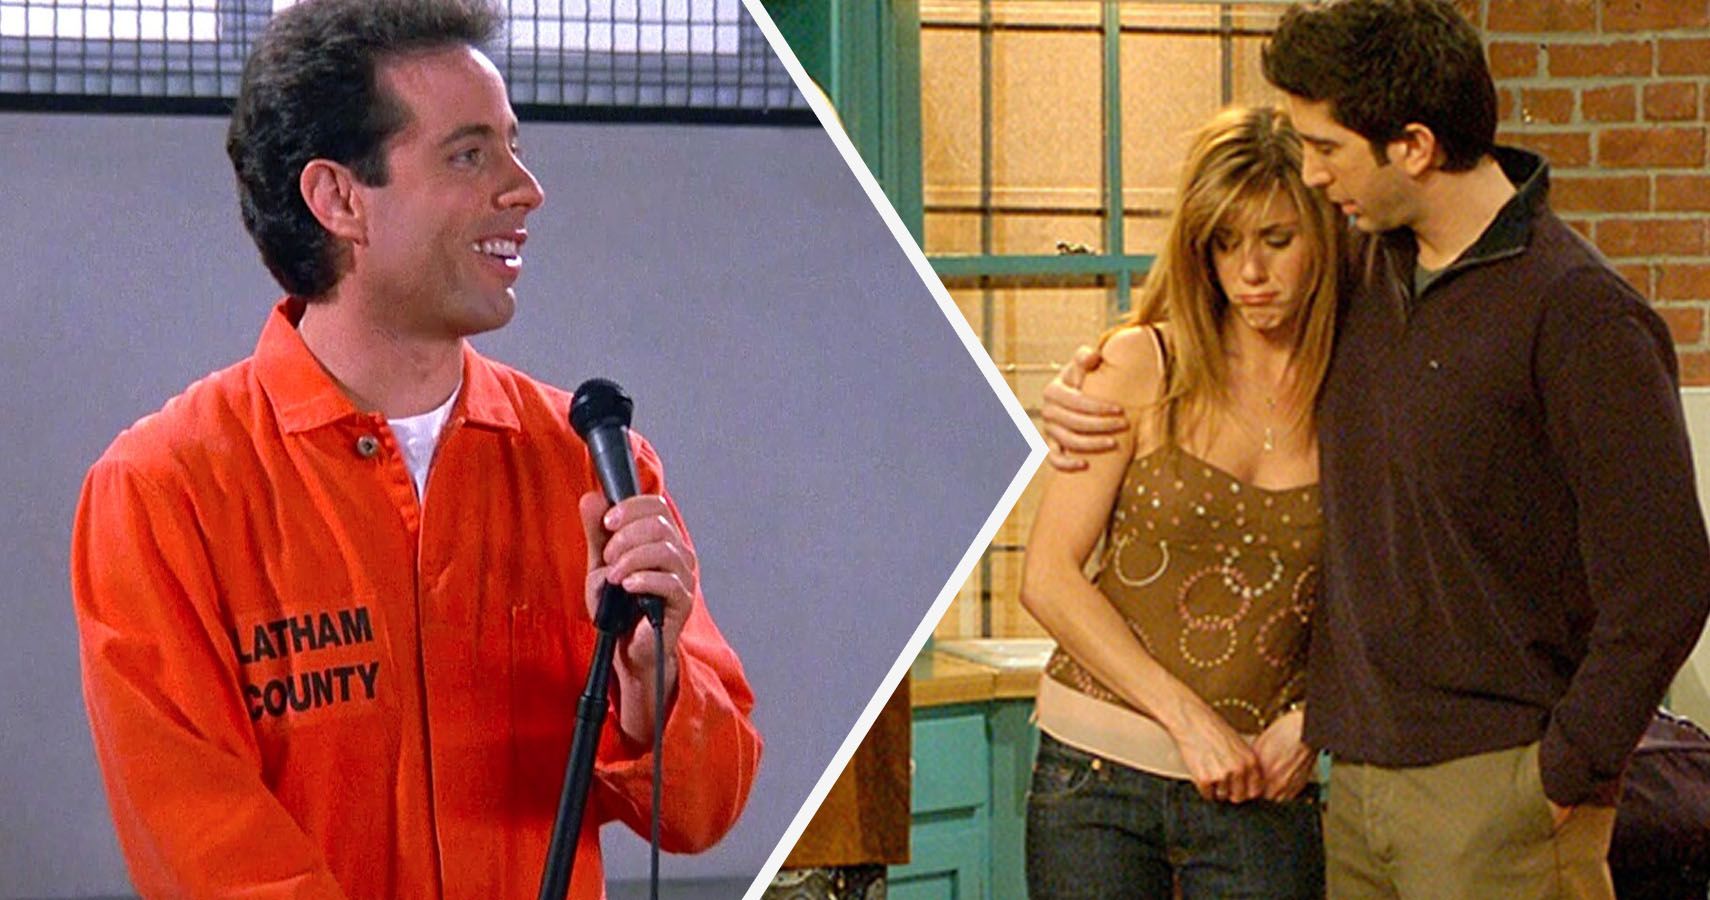 Jerry in prison from Seinfeld, Ross and Rachel hugging on Friends 